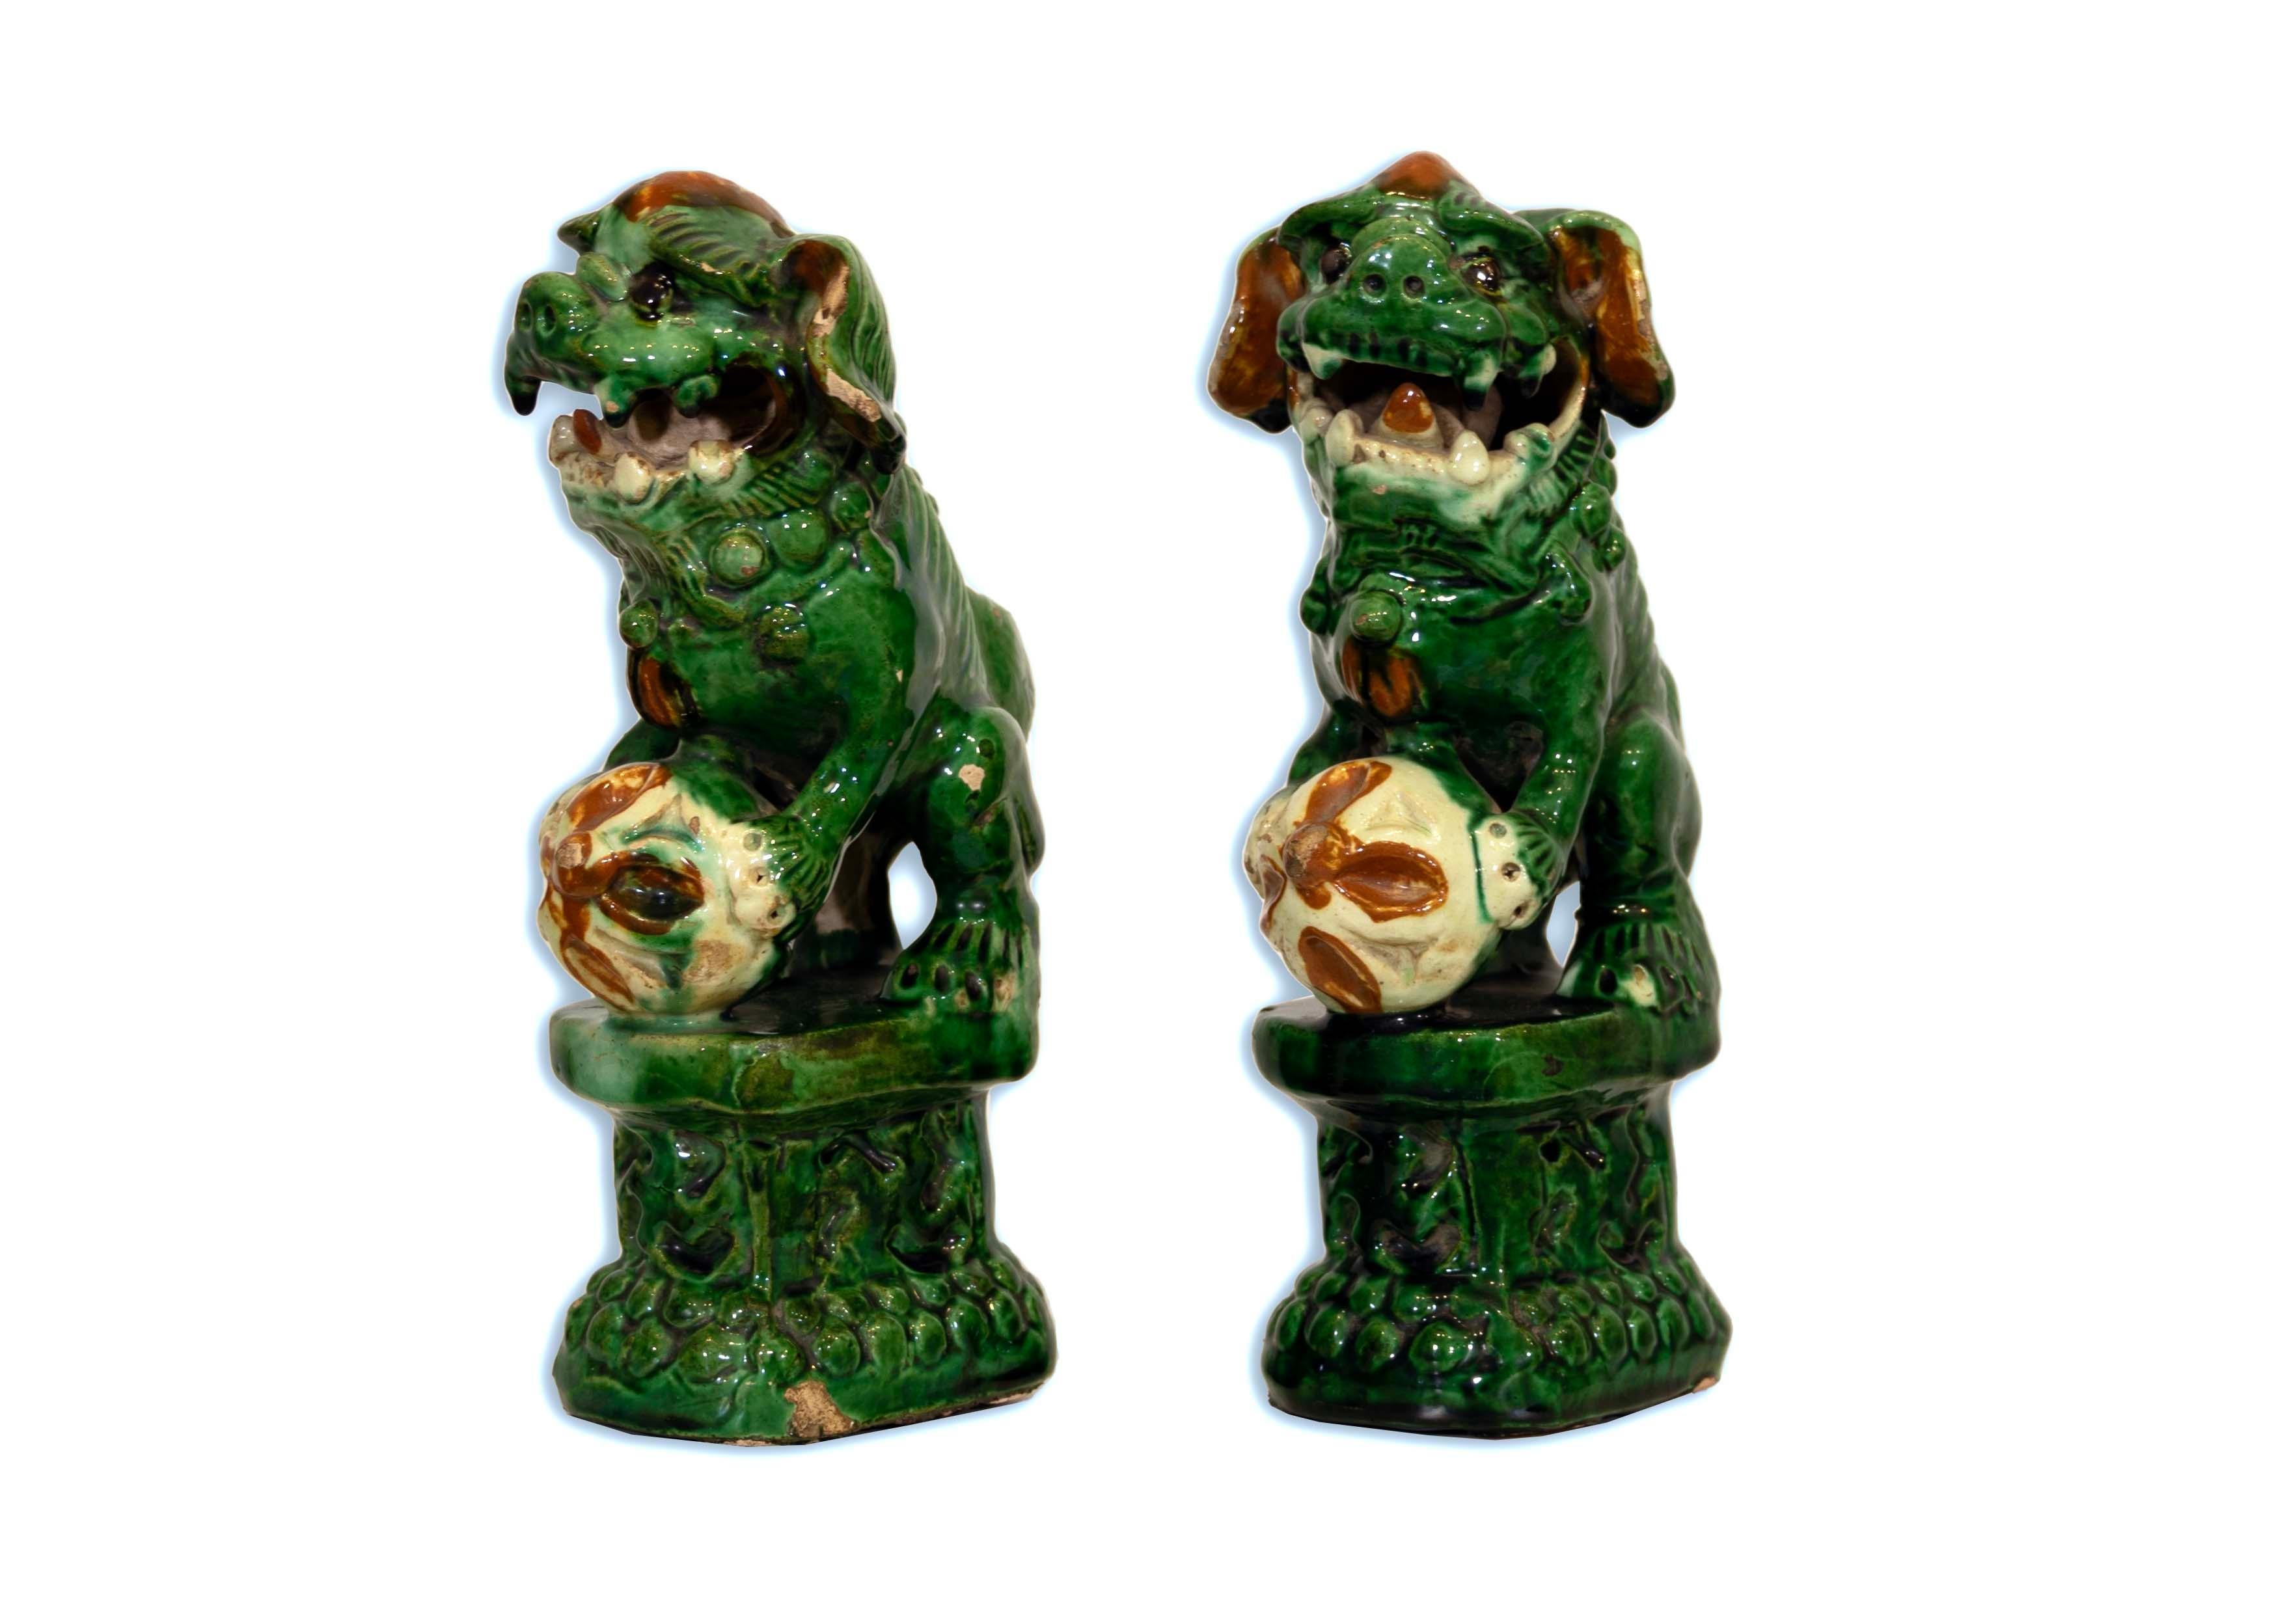 This exquisite pair of green Chinese Sancai-glazed Fu Dogs from circa 1900 is a stunning representation of historical artistry. With their vibrant emerald hues and tri-color detailing, these guardian figures radiate with an antique charm that adds a